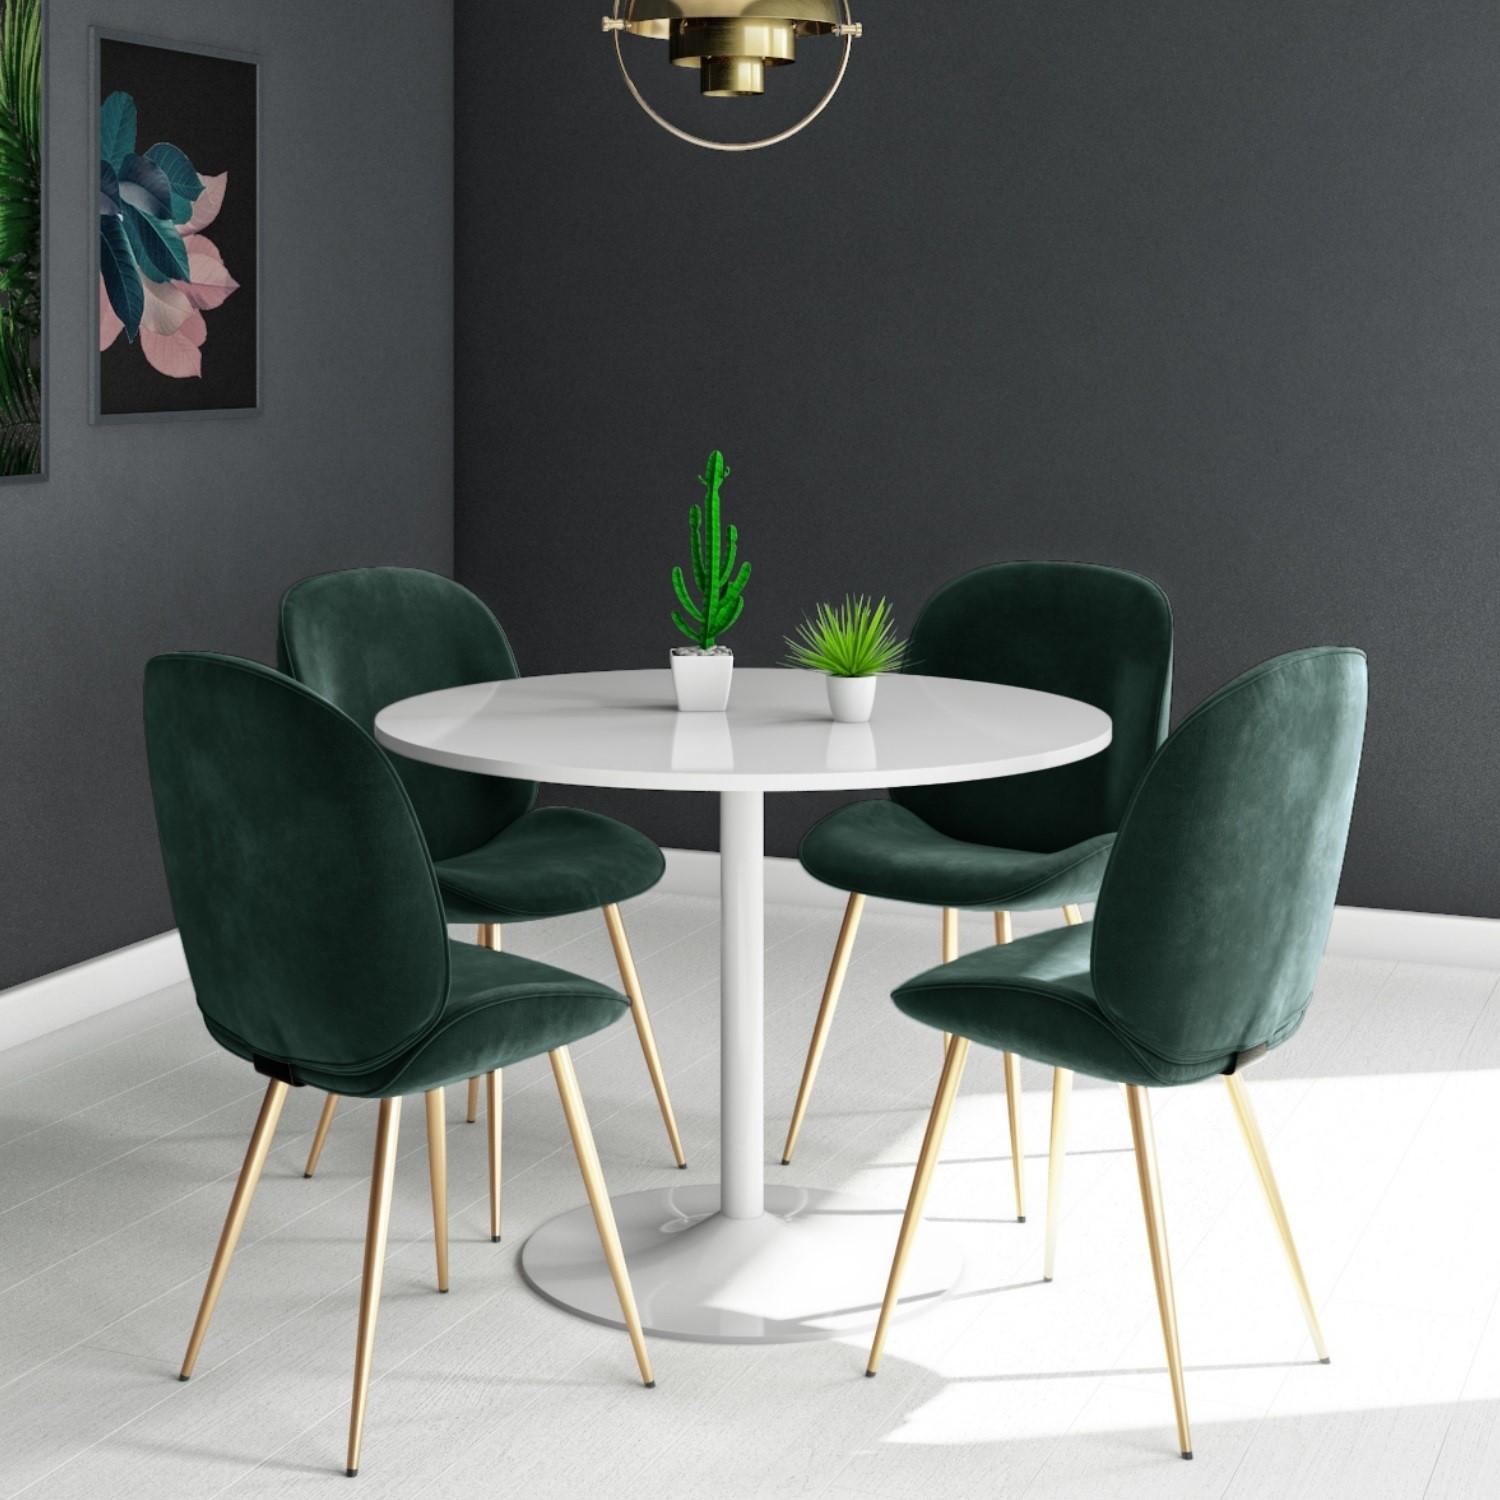 White Table Green Chairs - Dining Set Round White Table And 4 Green